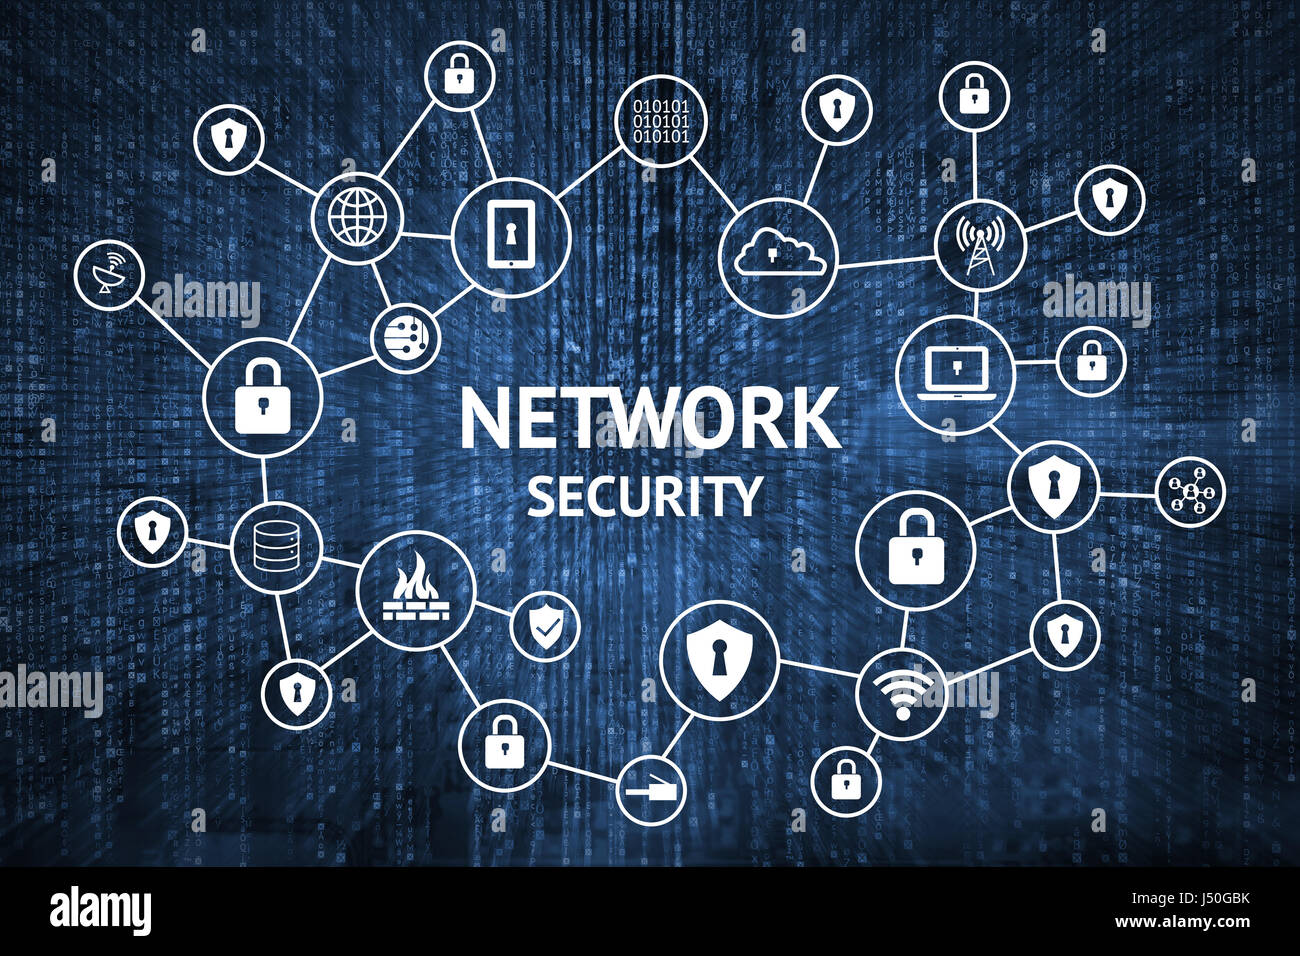 network security images